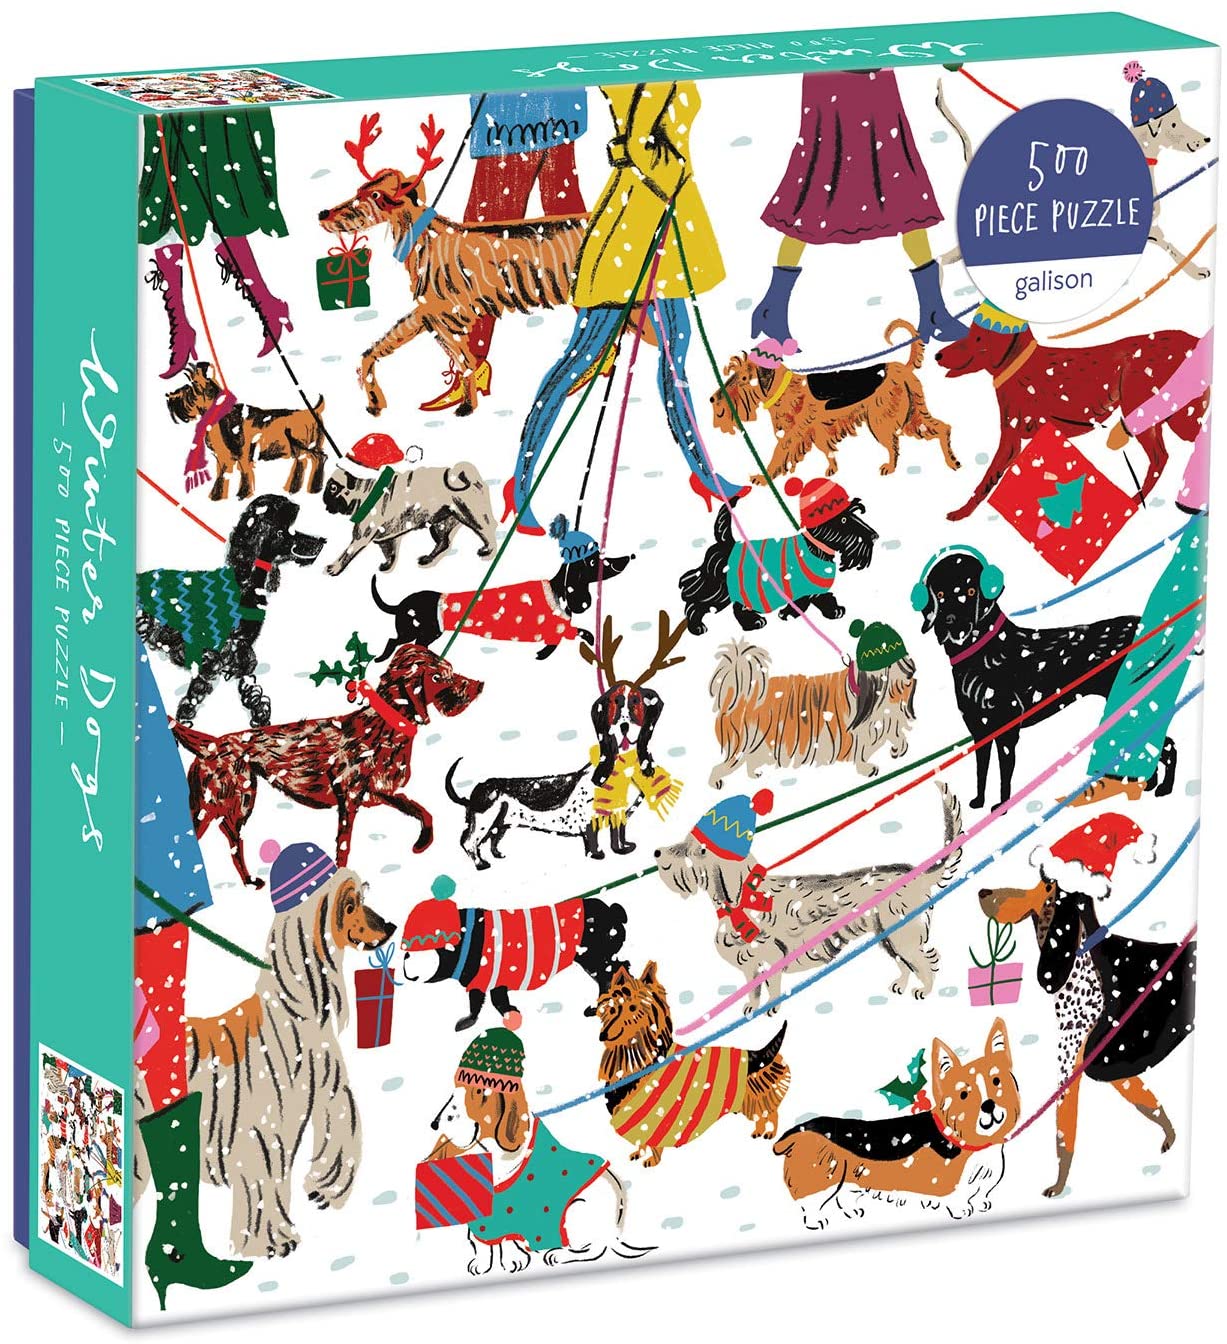 cover of puzzle box with graphics of dogs on leashes wearing colorful sweaters and hats.